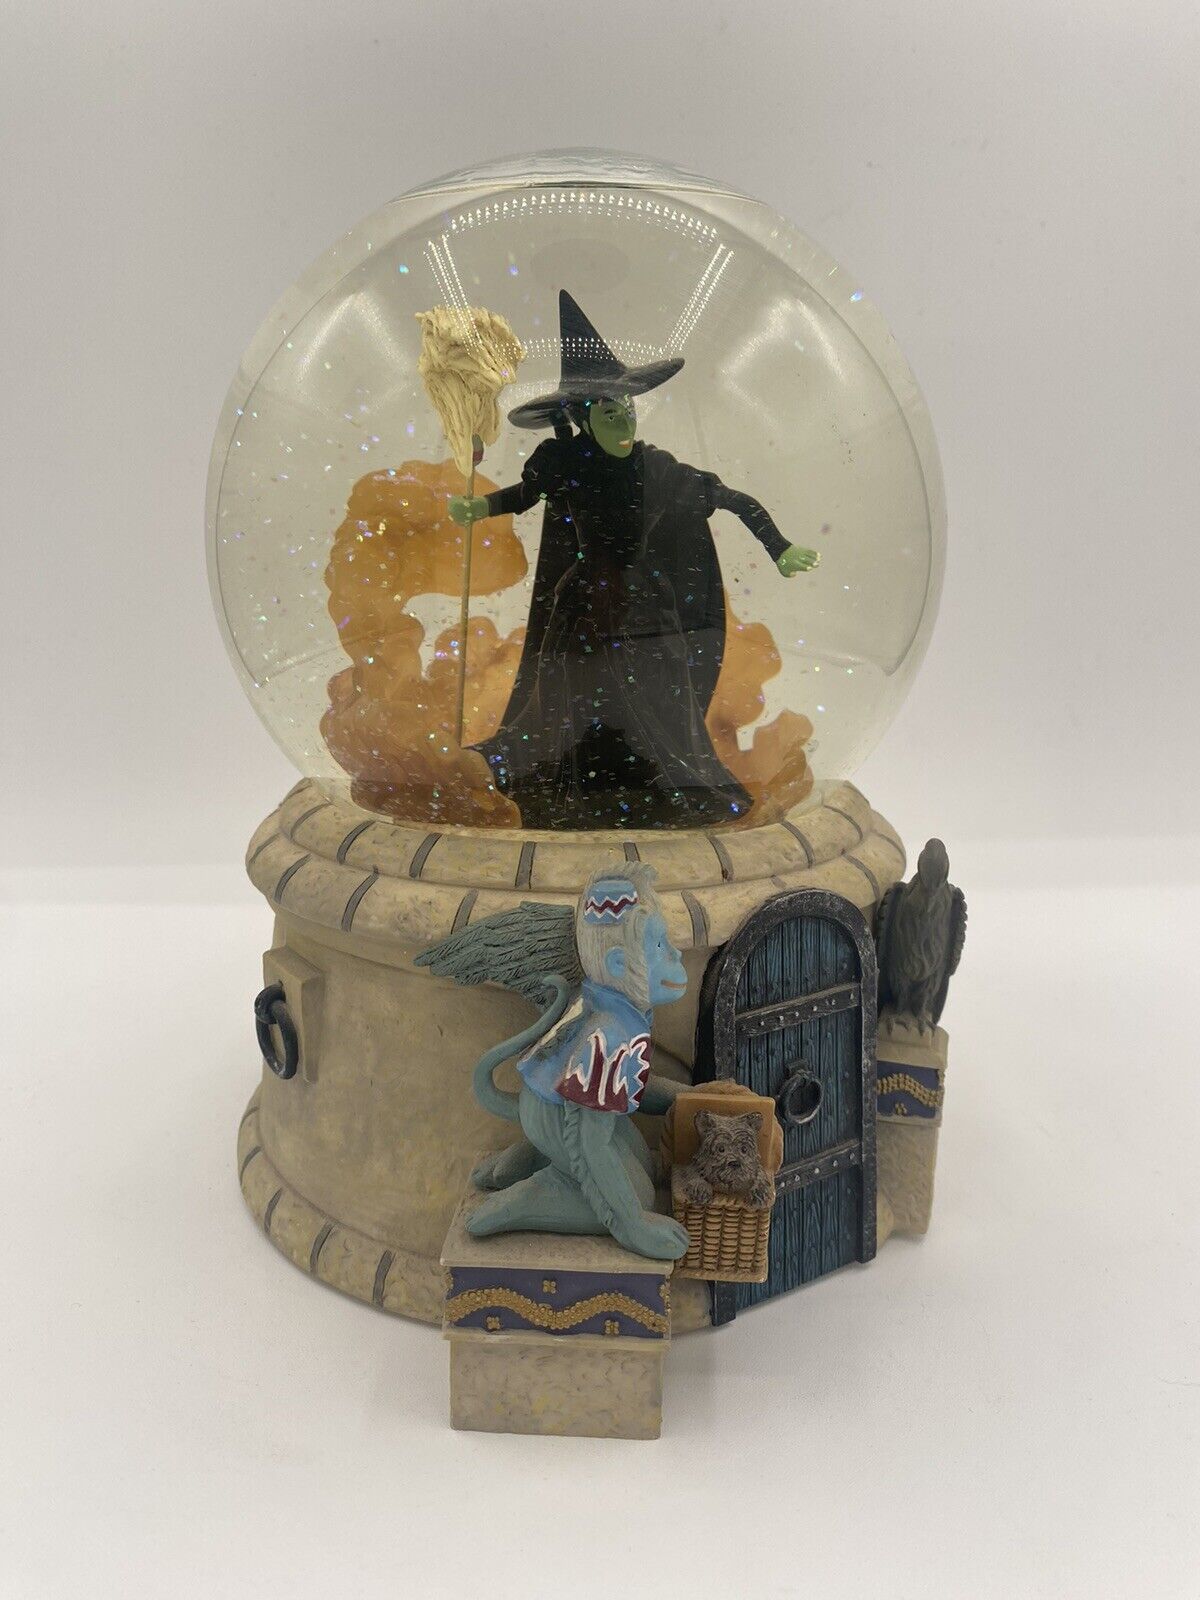 wizard of oz snow globe music box Wicked Witch Of West, Very Rare Vintage 2000’s